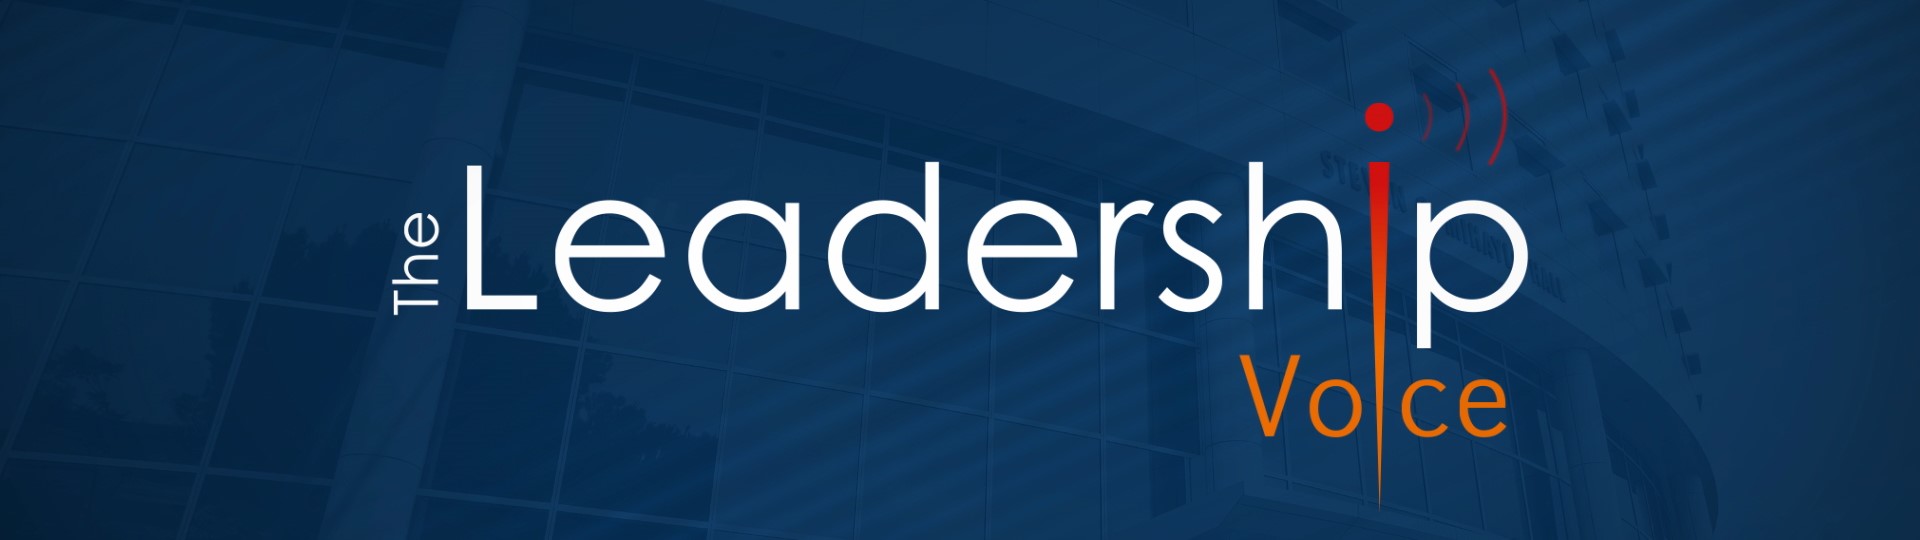 The Leadership Voice Banner